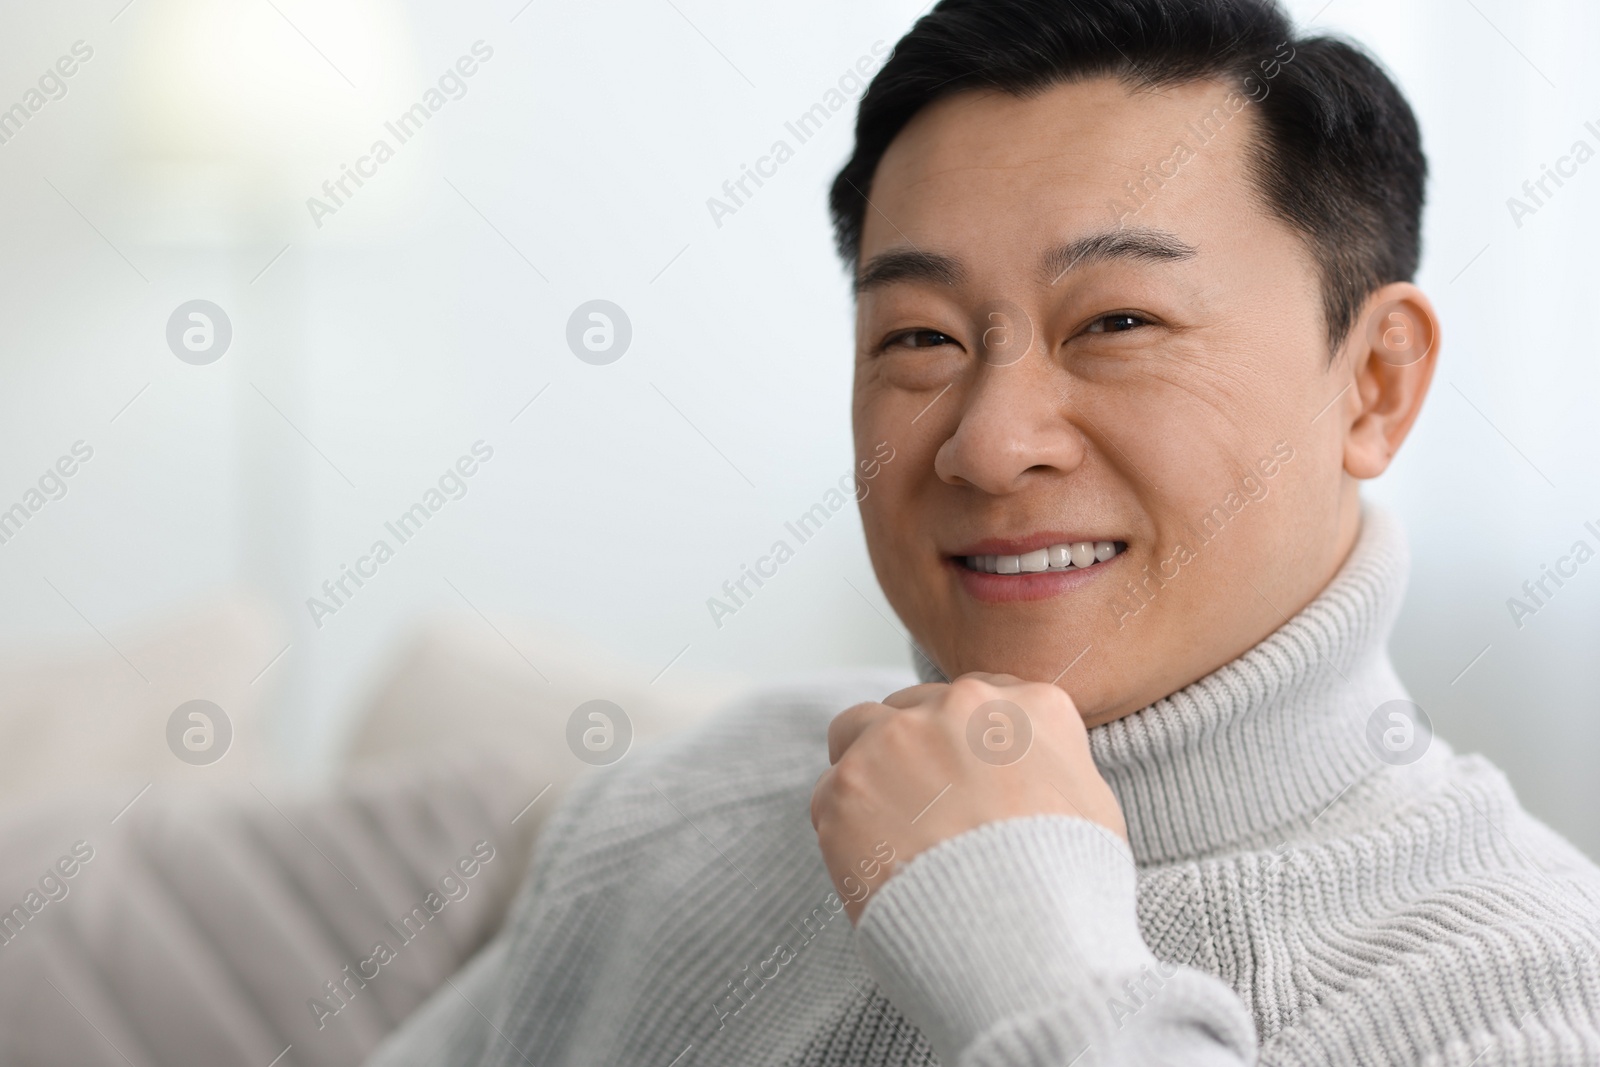 Photo of Portrait of smiling man on blurred background. Space for text